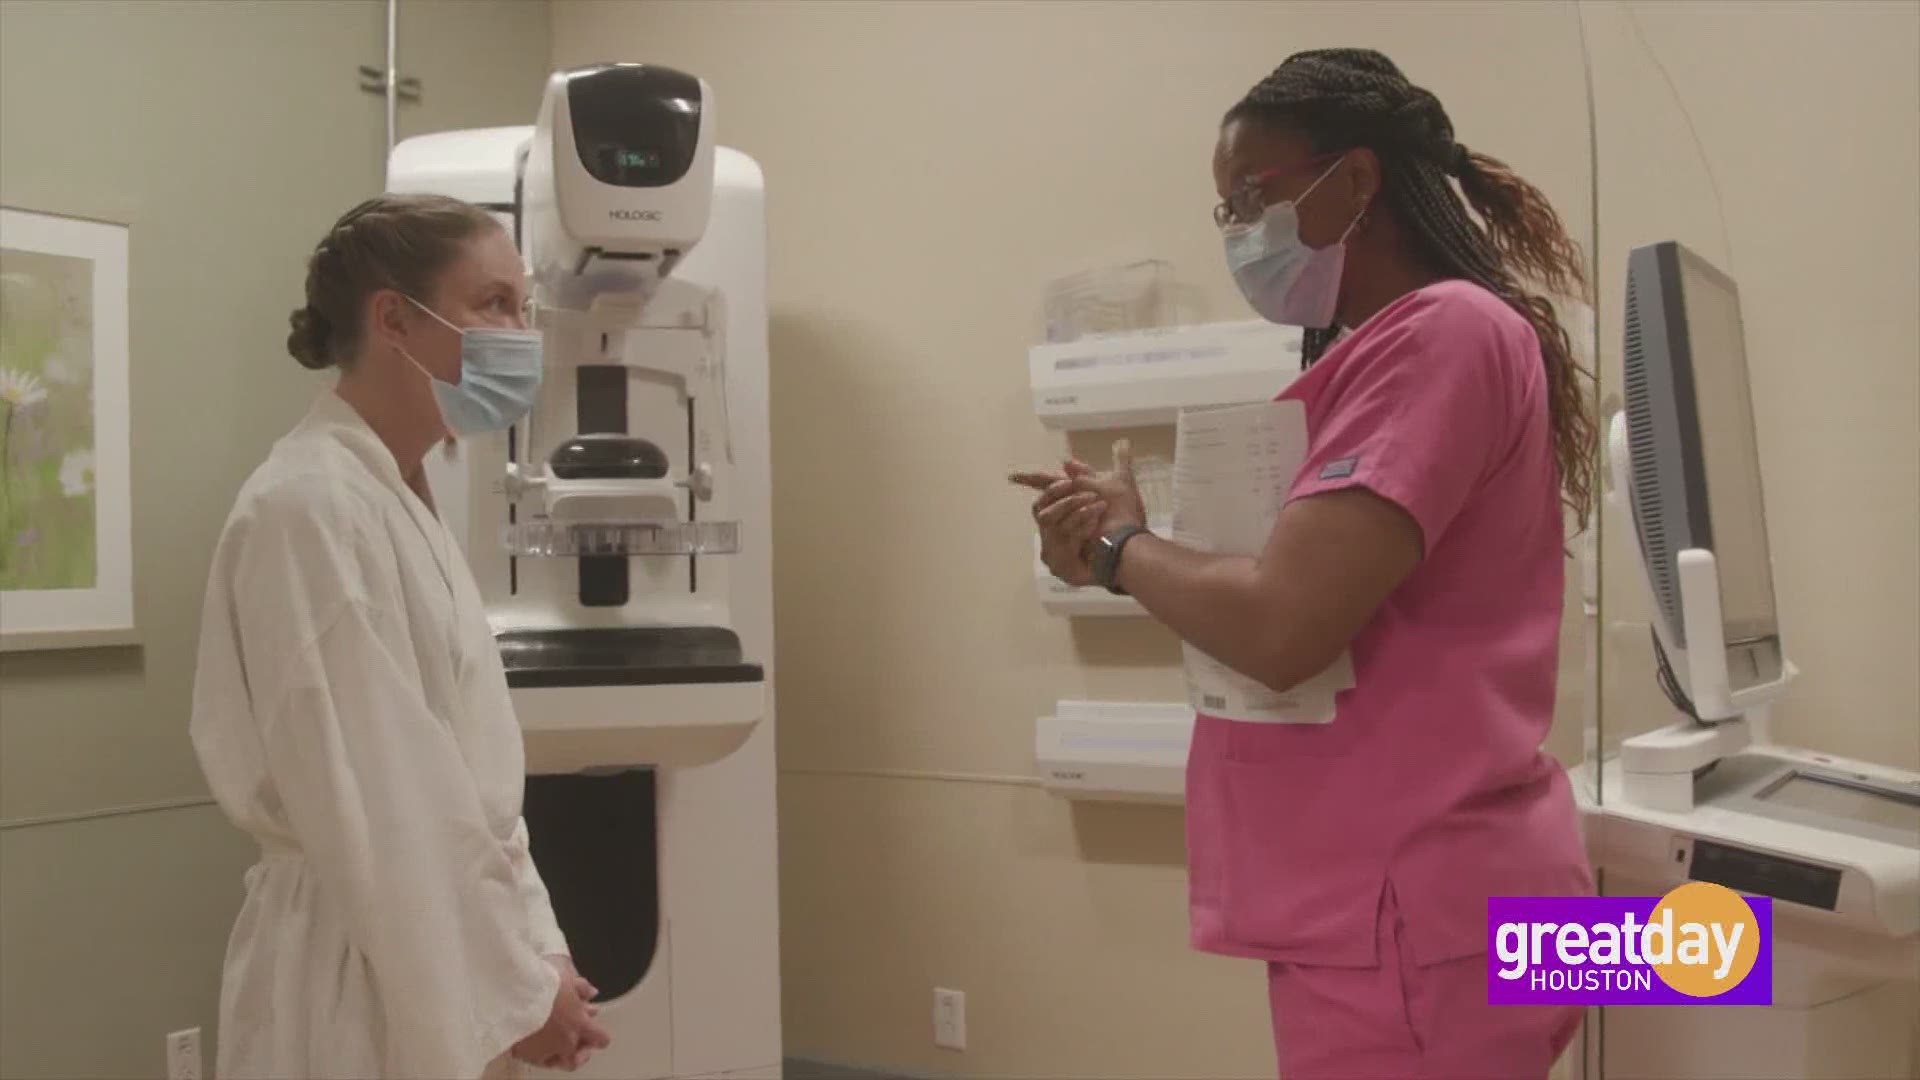 Memorial Hermann combines advanced technology with dedicated radiologists to provide a high-quality breast care experience.